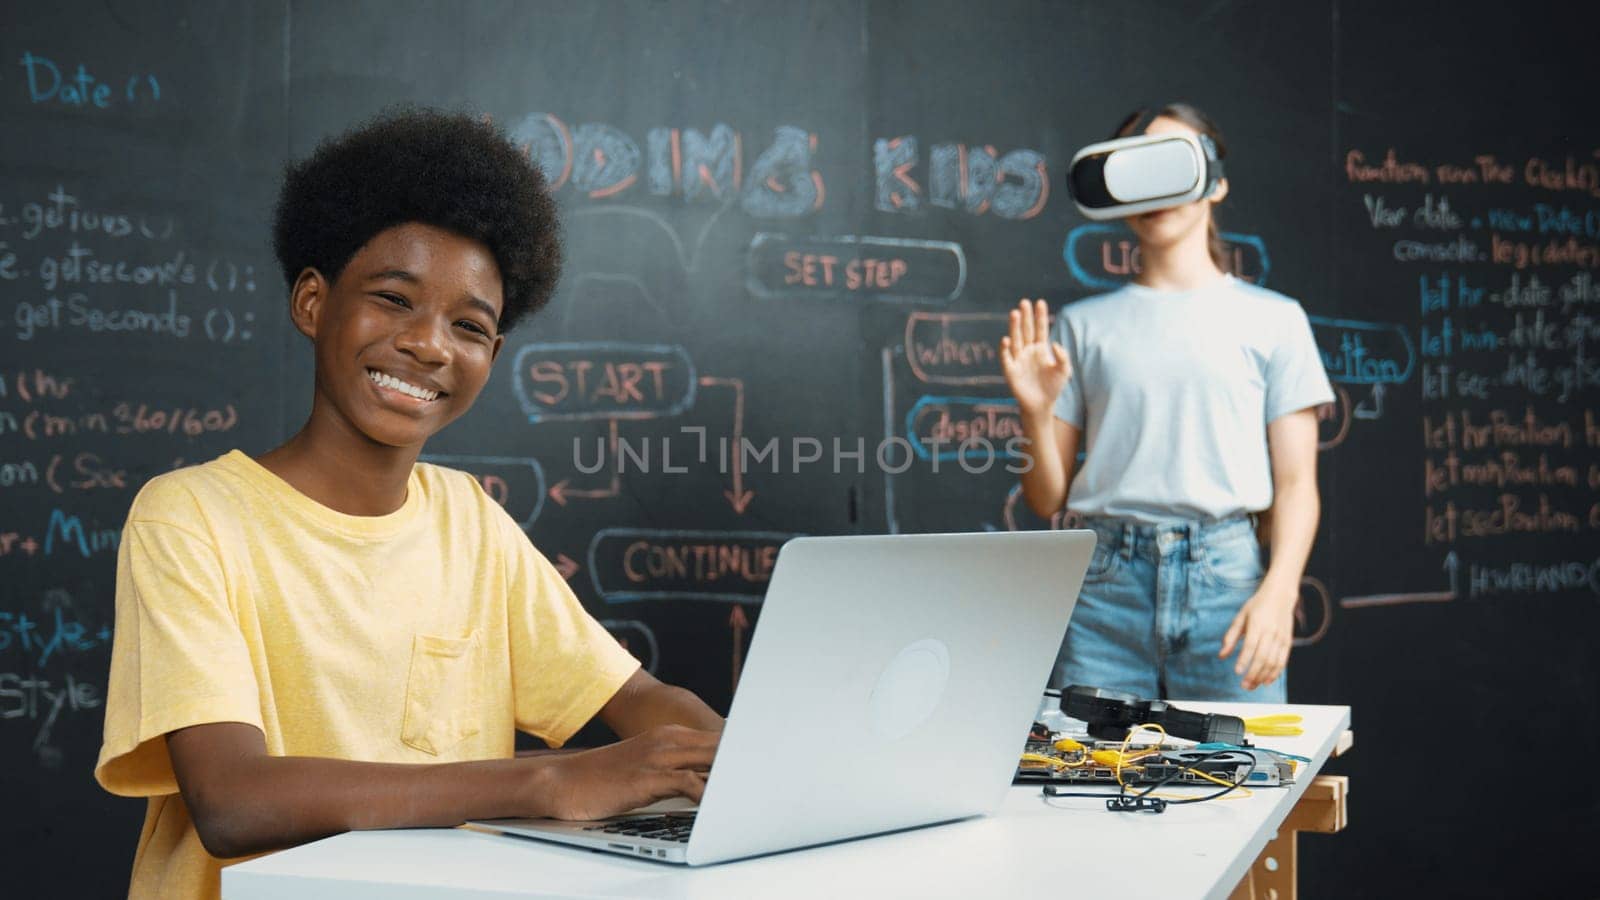 Smart african student programing and coding innovative system while caucasian girl enter in metaverse or virtual world by using VR or head set at blackboard in STEM technology classroom. Edification.